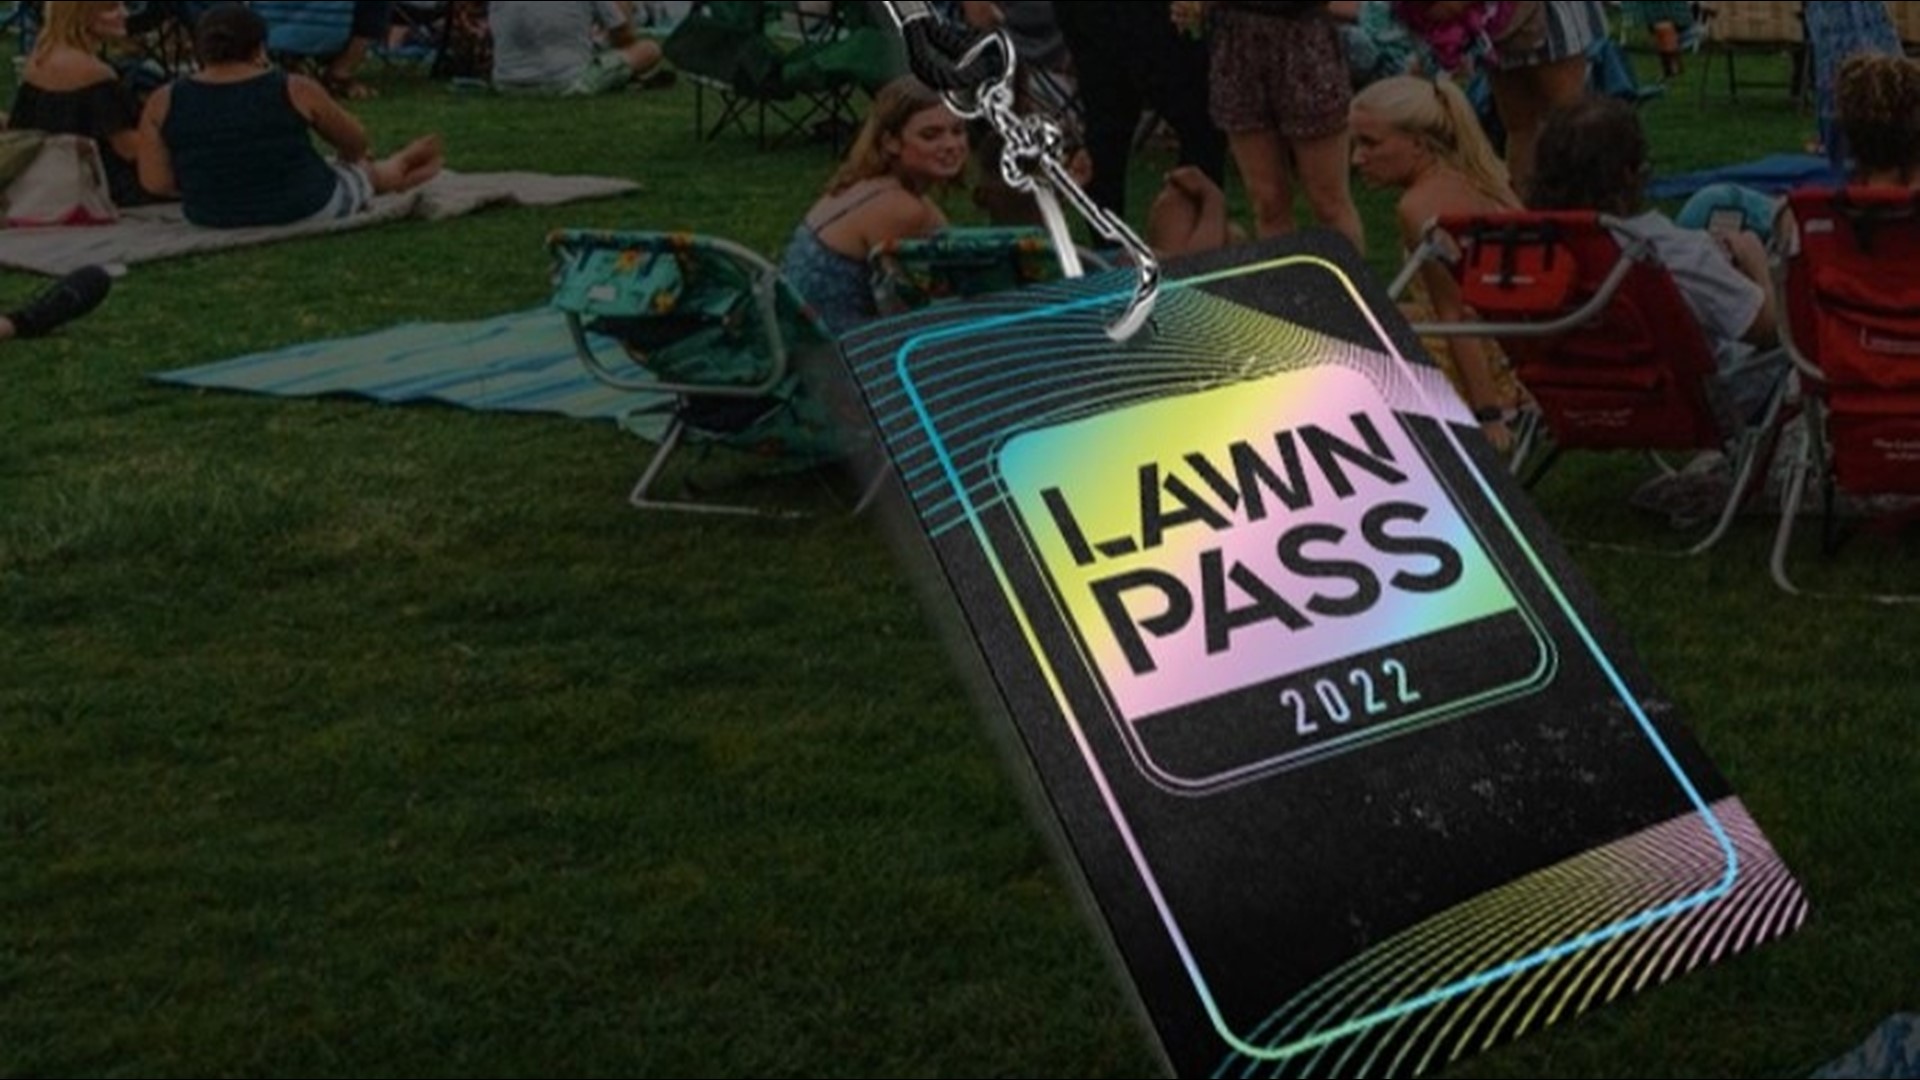 Blossom Music Center's 199 Lawn Pass goes on sale Wednesday